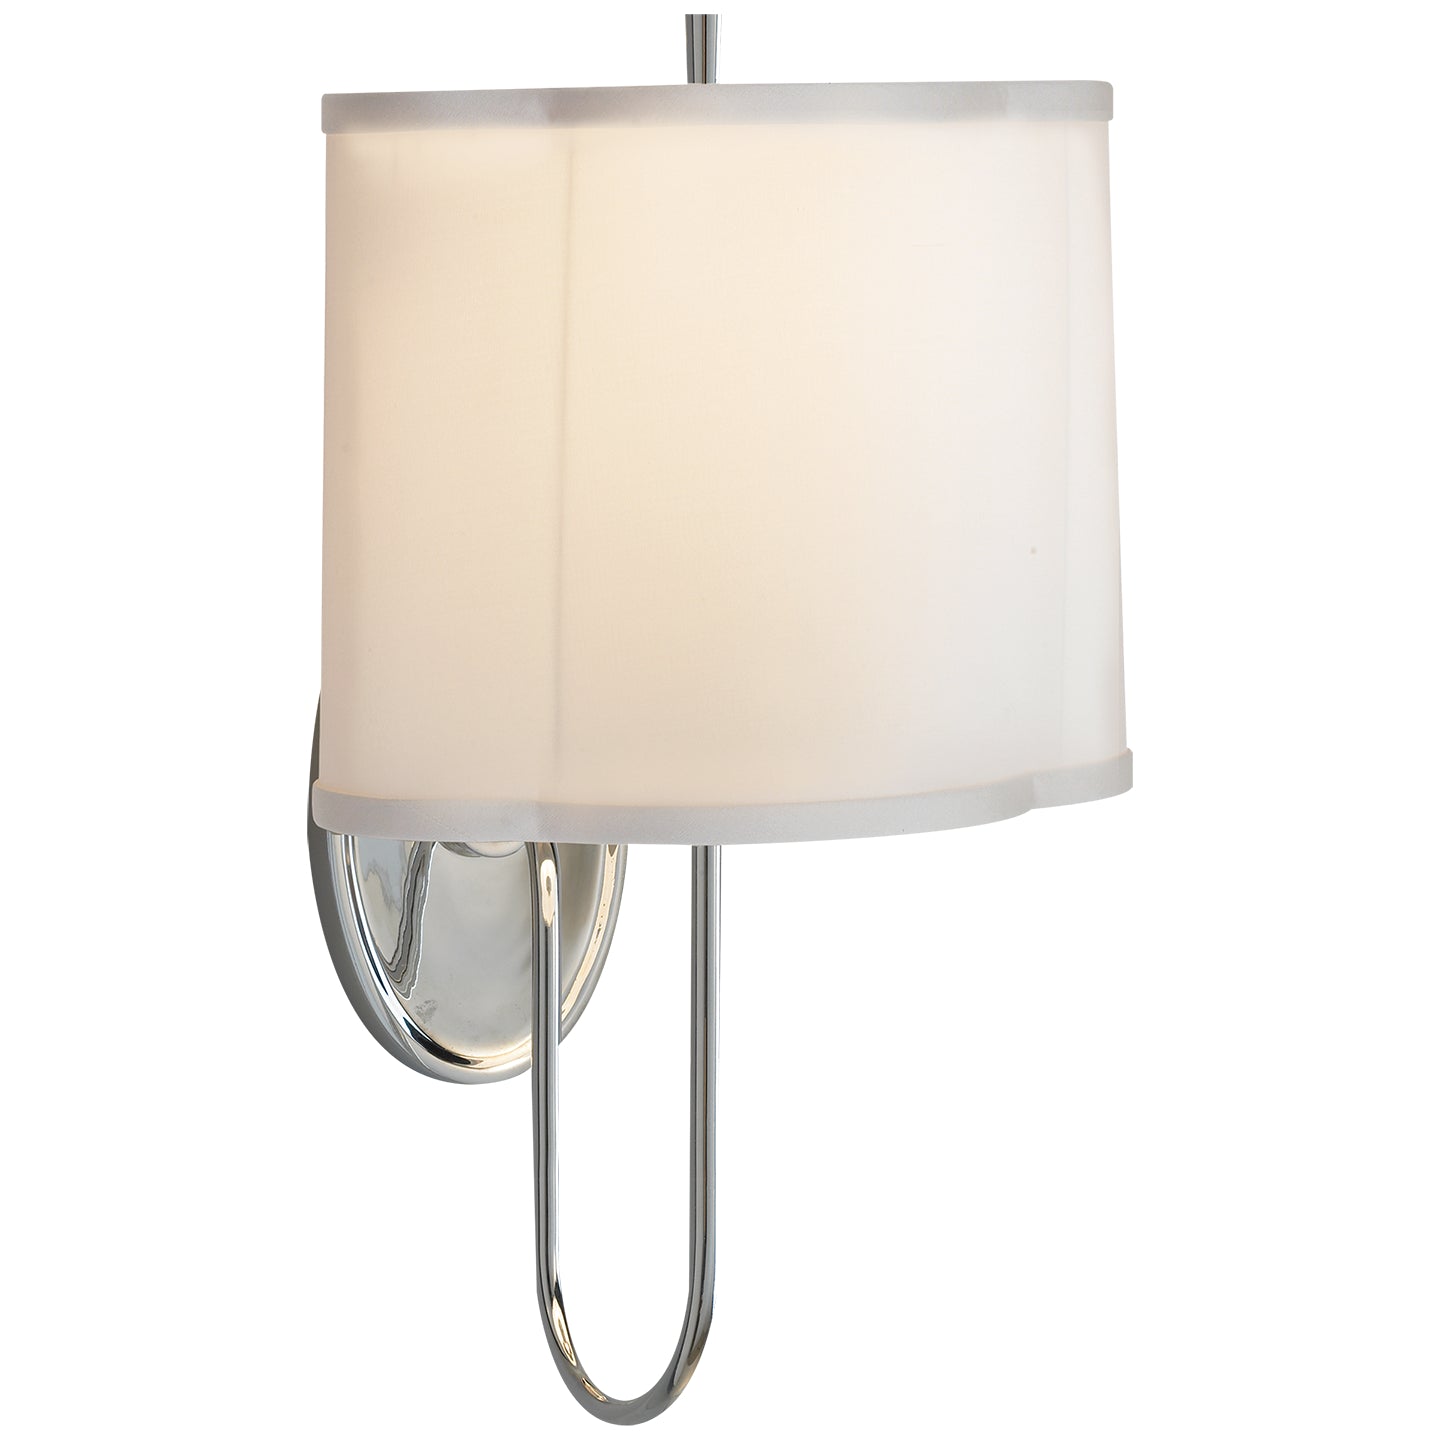 Visual Comfort Signature - BBL 2017SS-S - One Light Wall Sconce - Simple Scallop - Soft Silver